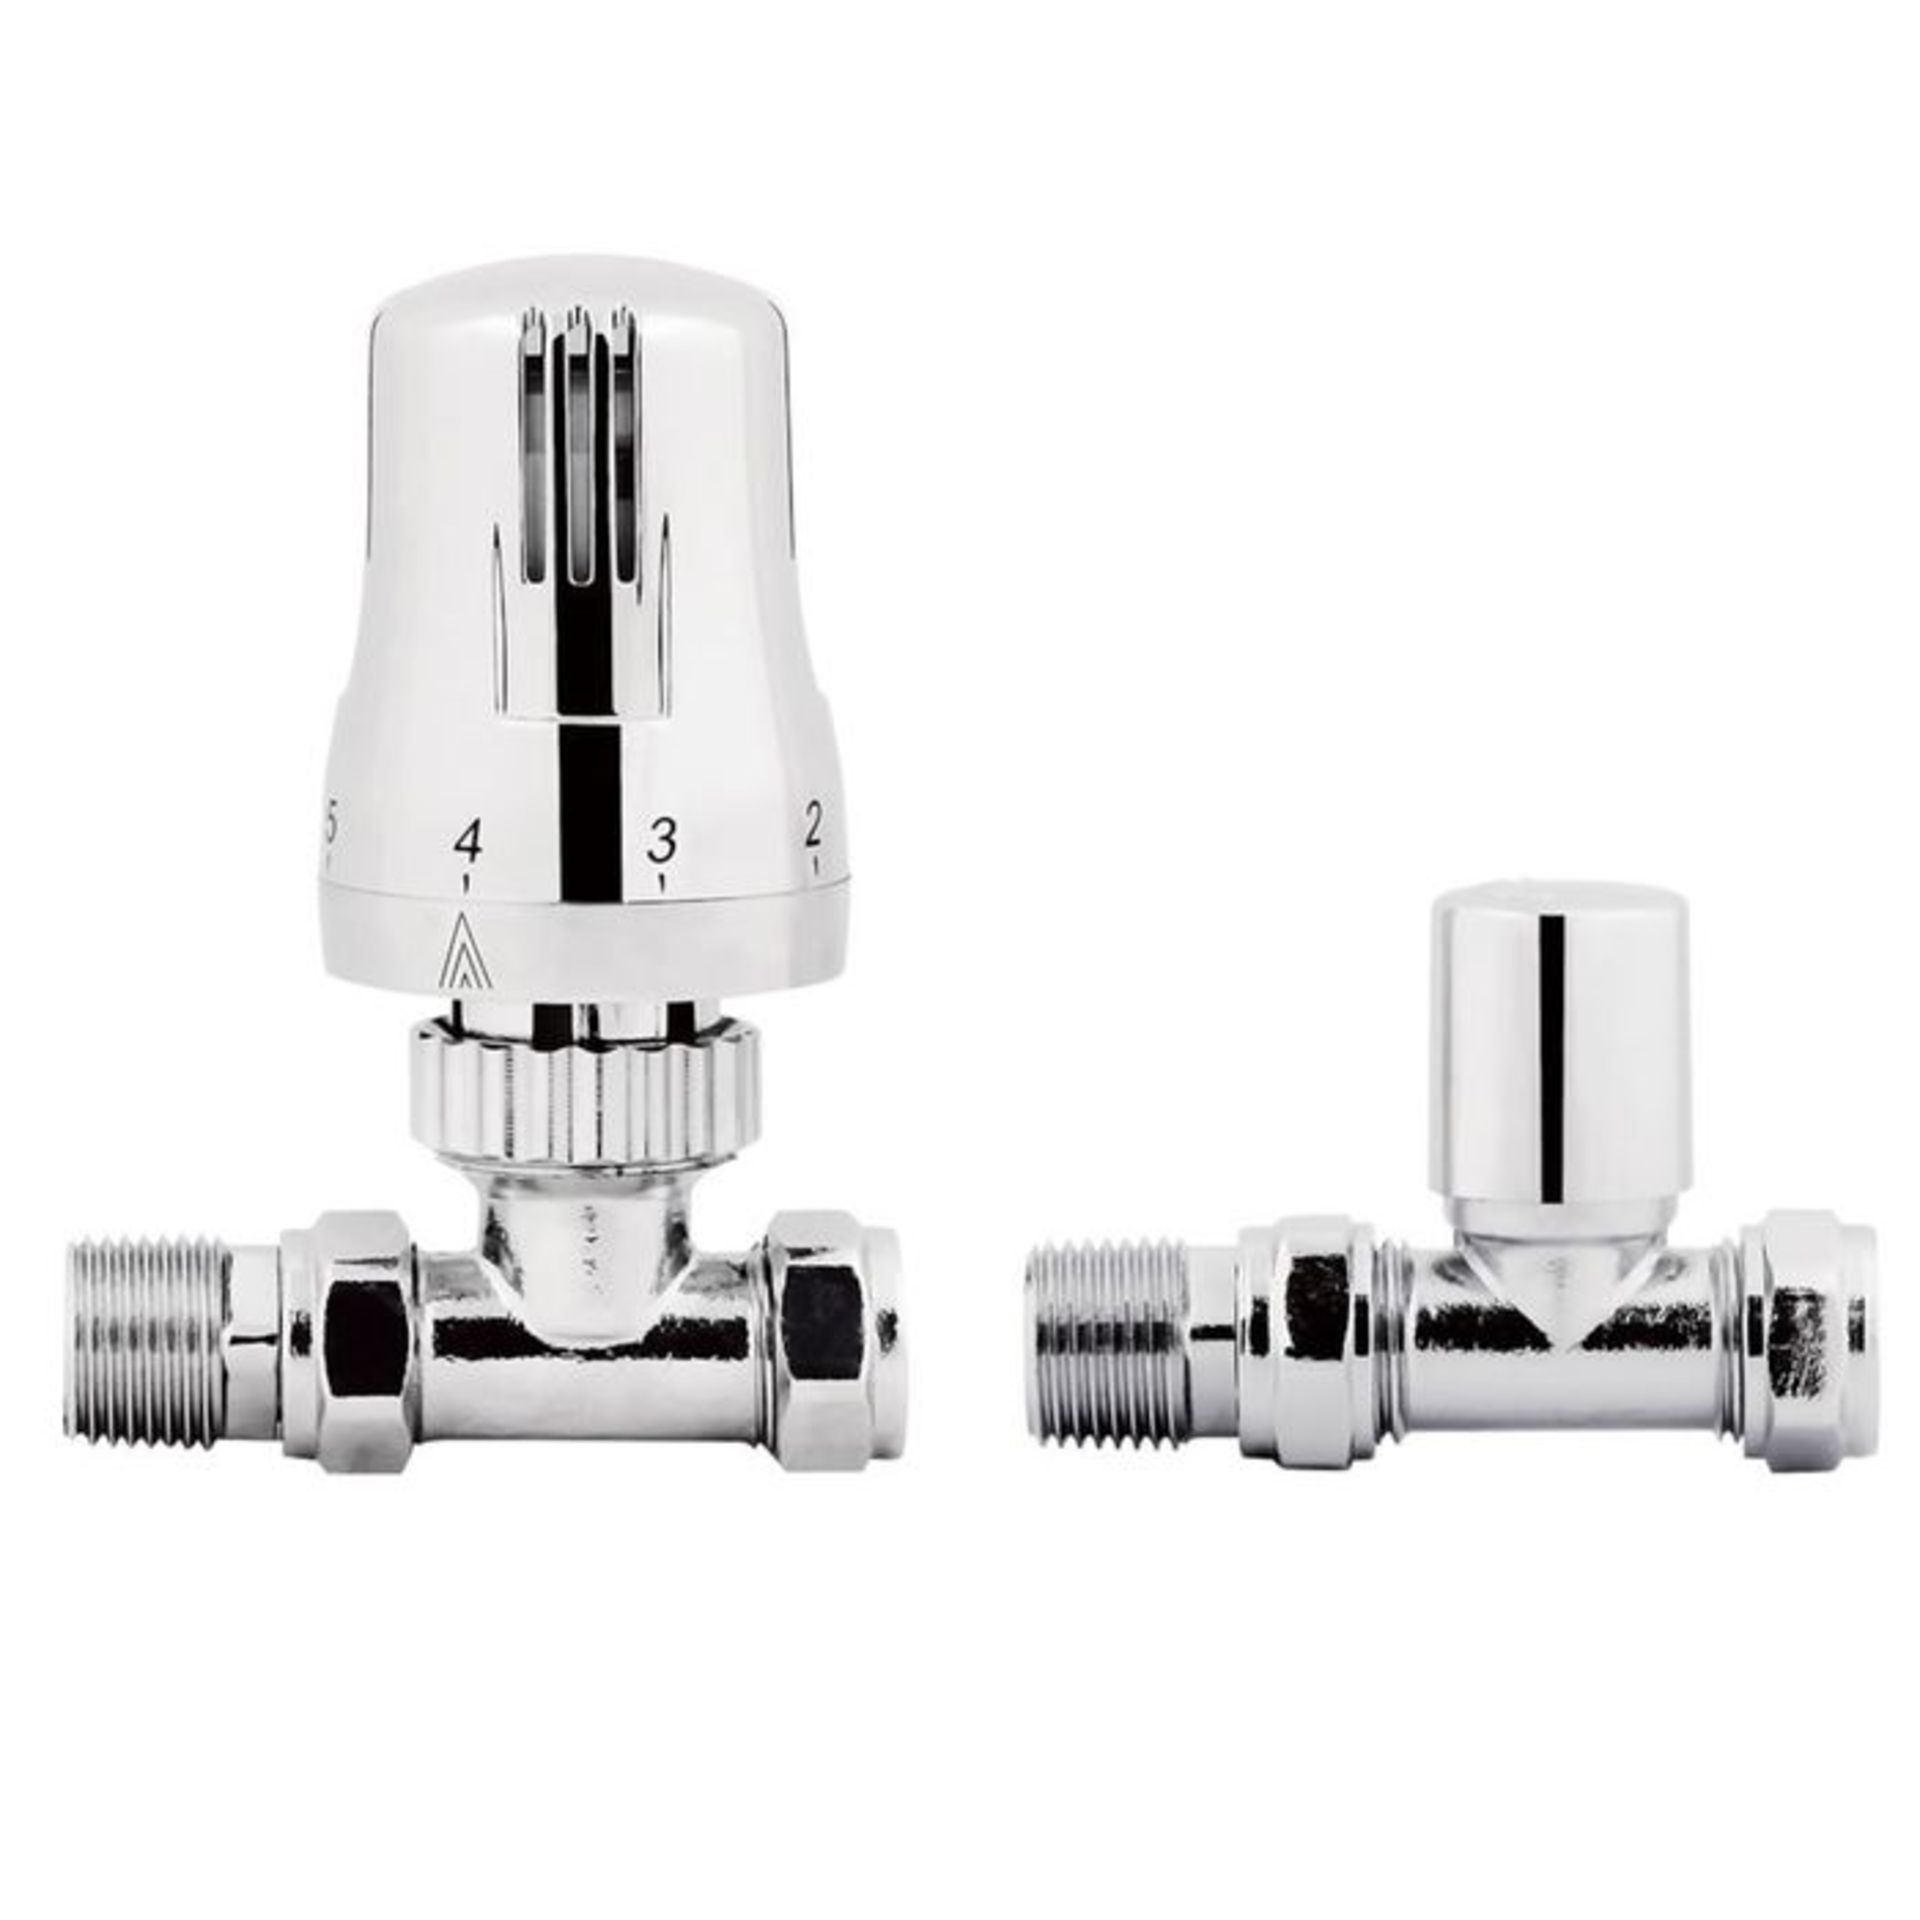 (ZZ114) 15mm Standard Connection Thermostatic Straight Chrome Radiator Valves Chrome Plated Solid